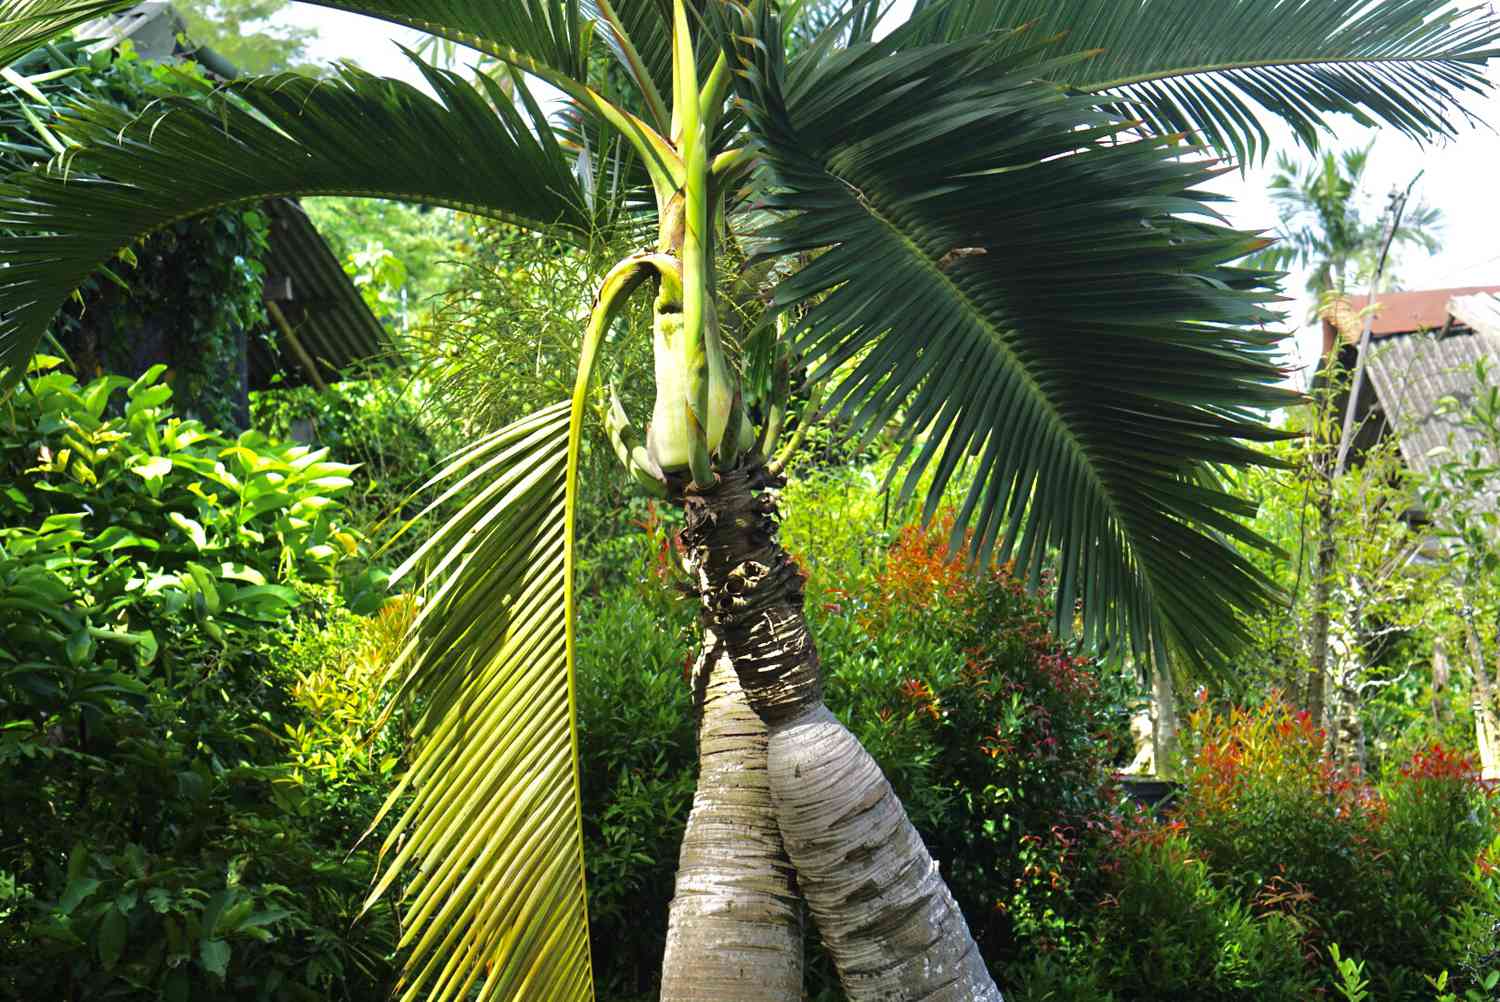 Bottle palm trees swollen trunk surrounded by bright green foliage